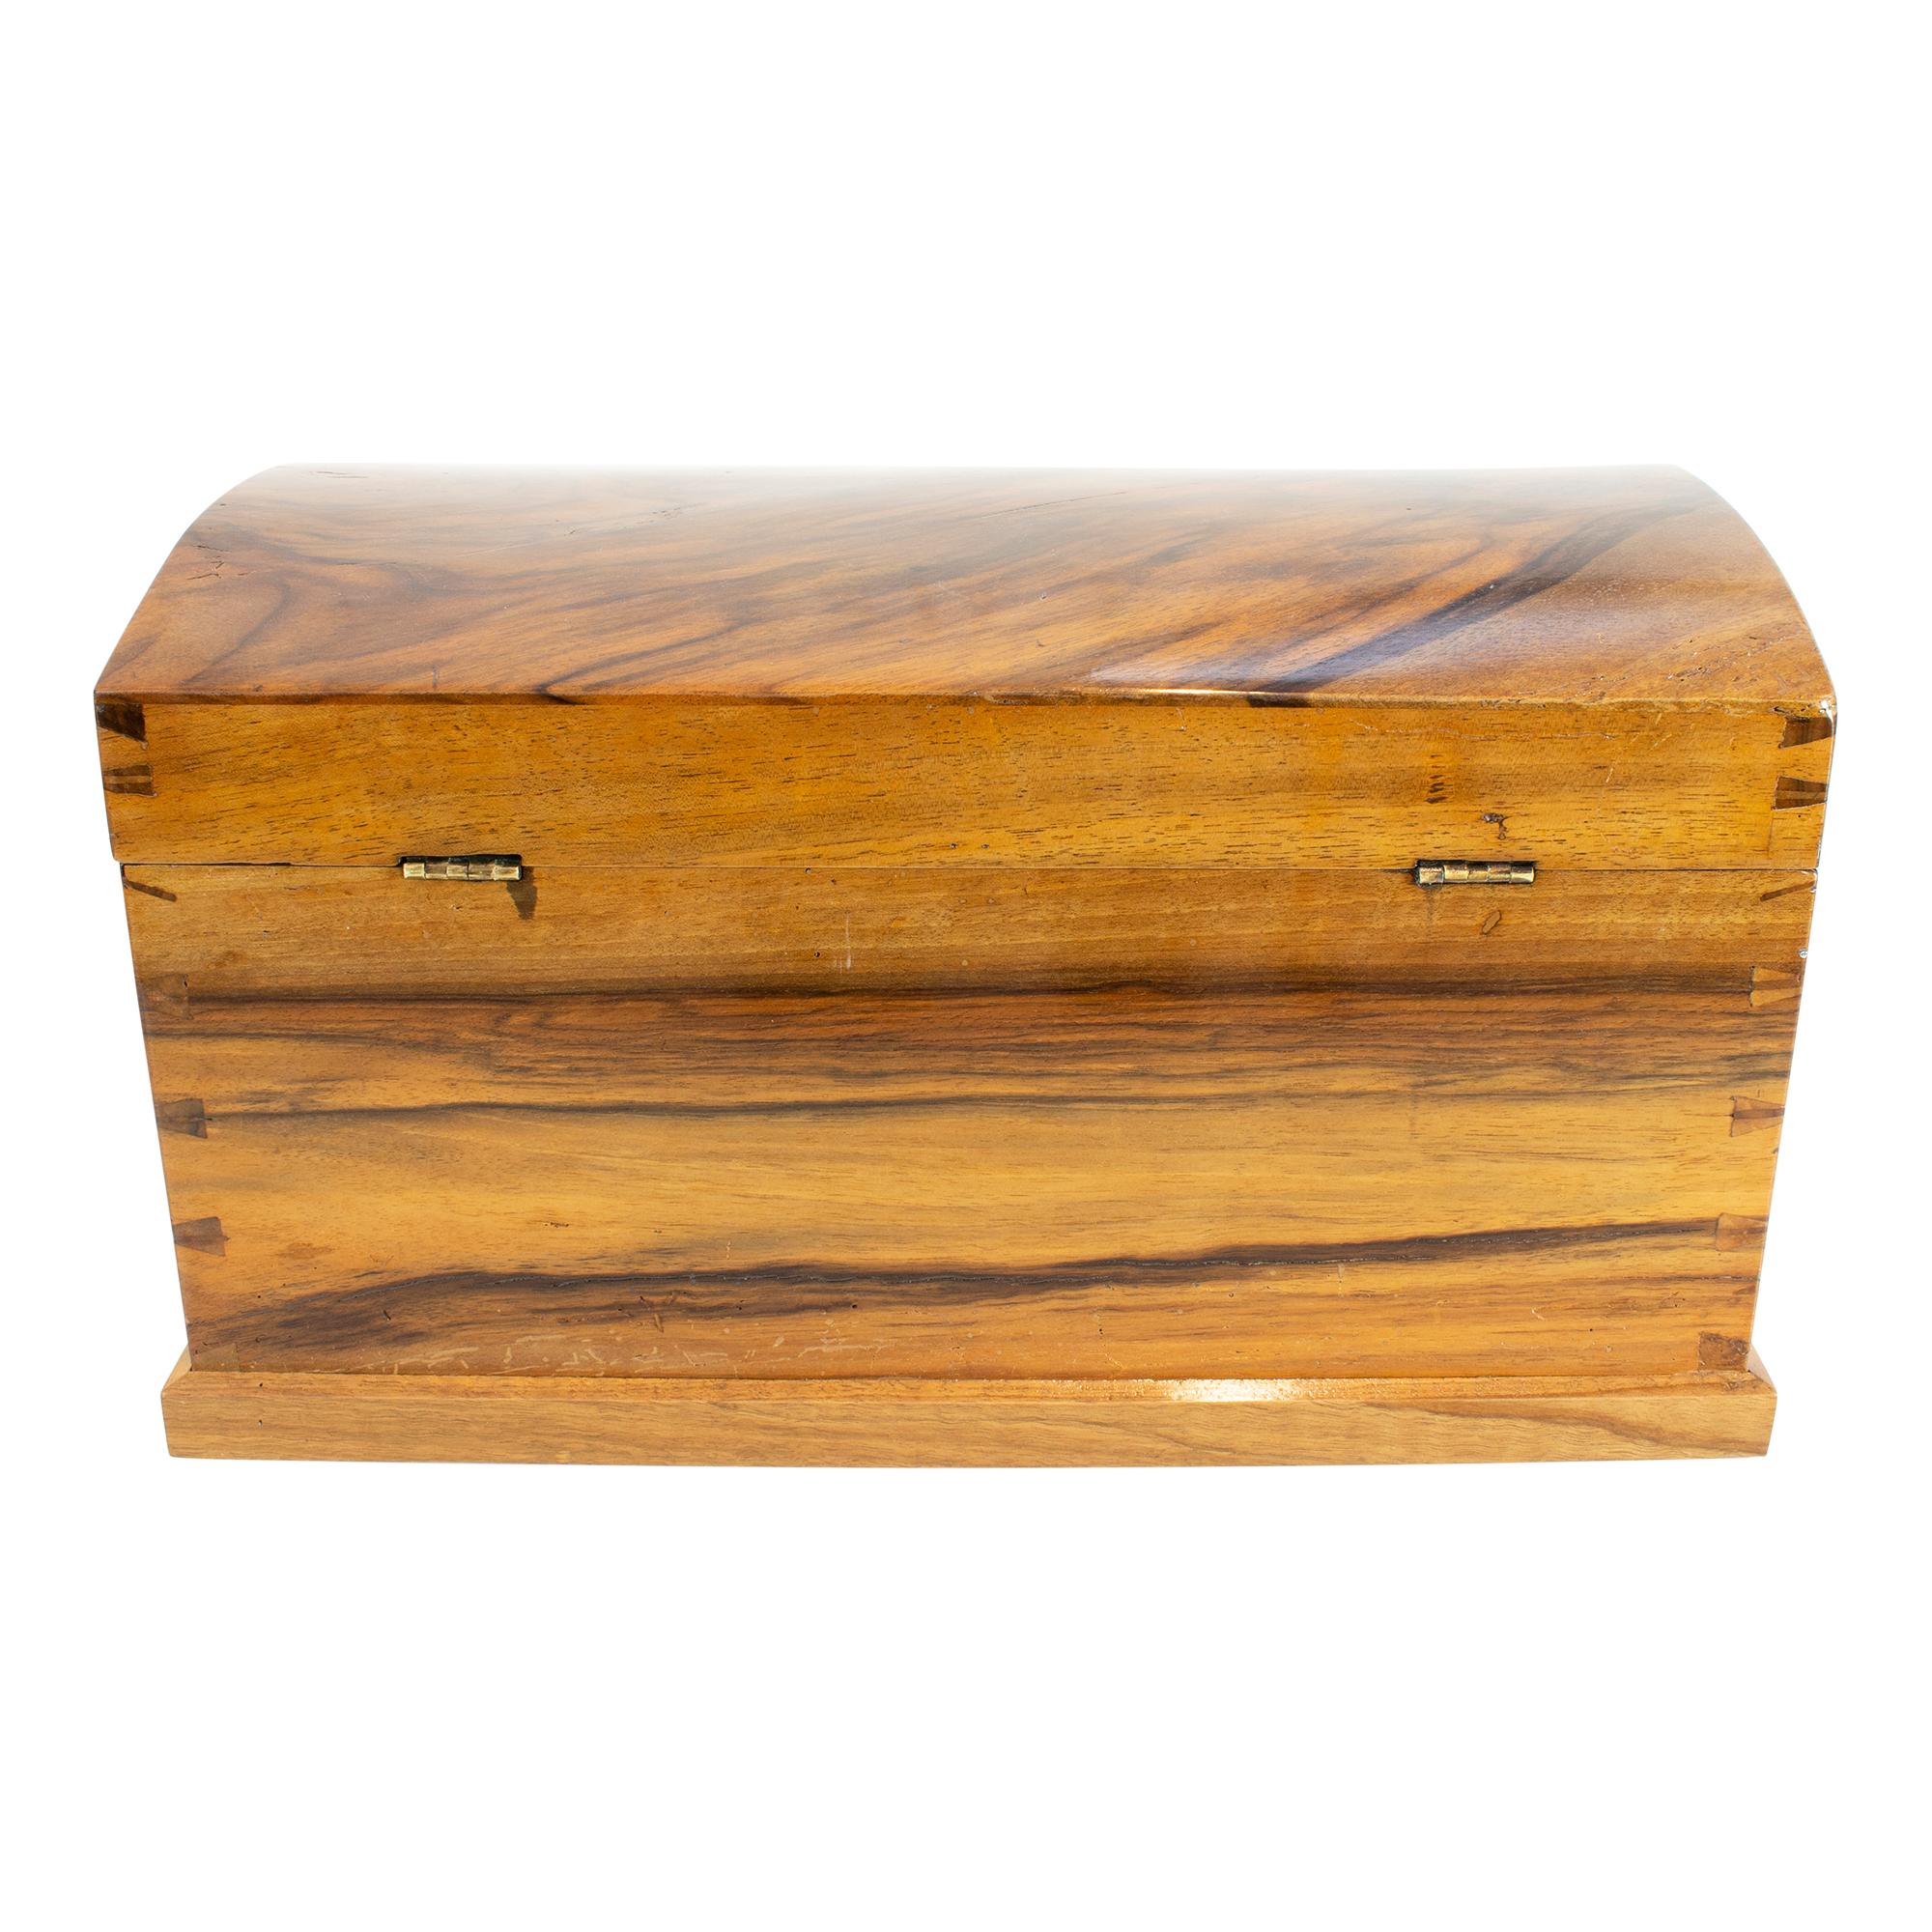 The miniature chest was made of walnut and dates back to the early Biedermeier period at the beginning of the 19th century. A very nice small rare furniture. The bottom of the chest is spruce, the rest is solid walnut. The lock of the chest has been